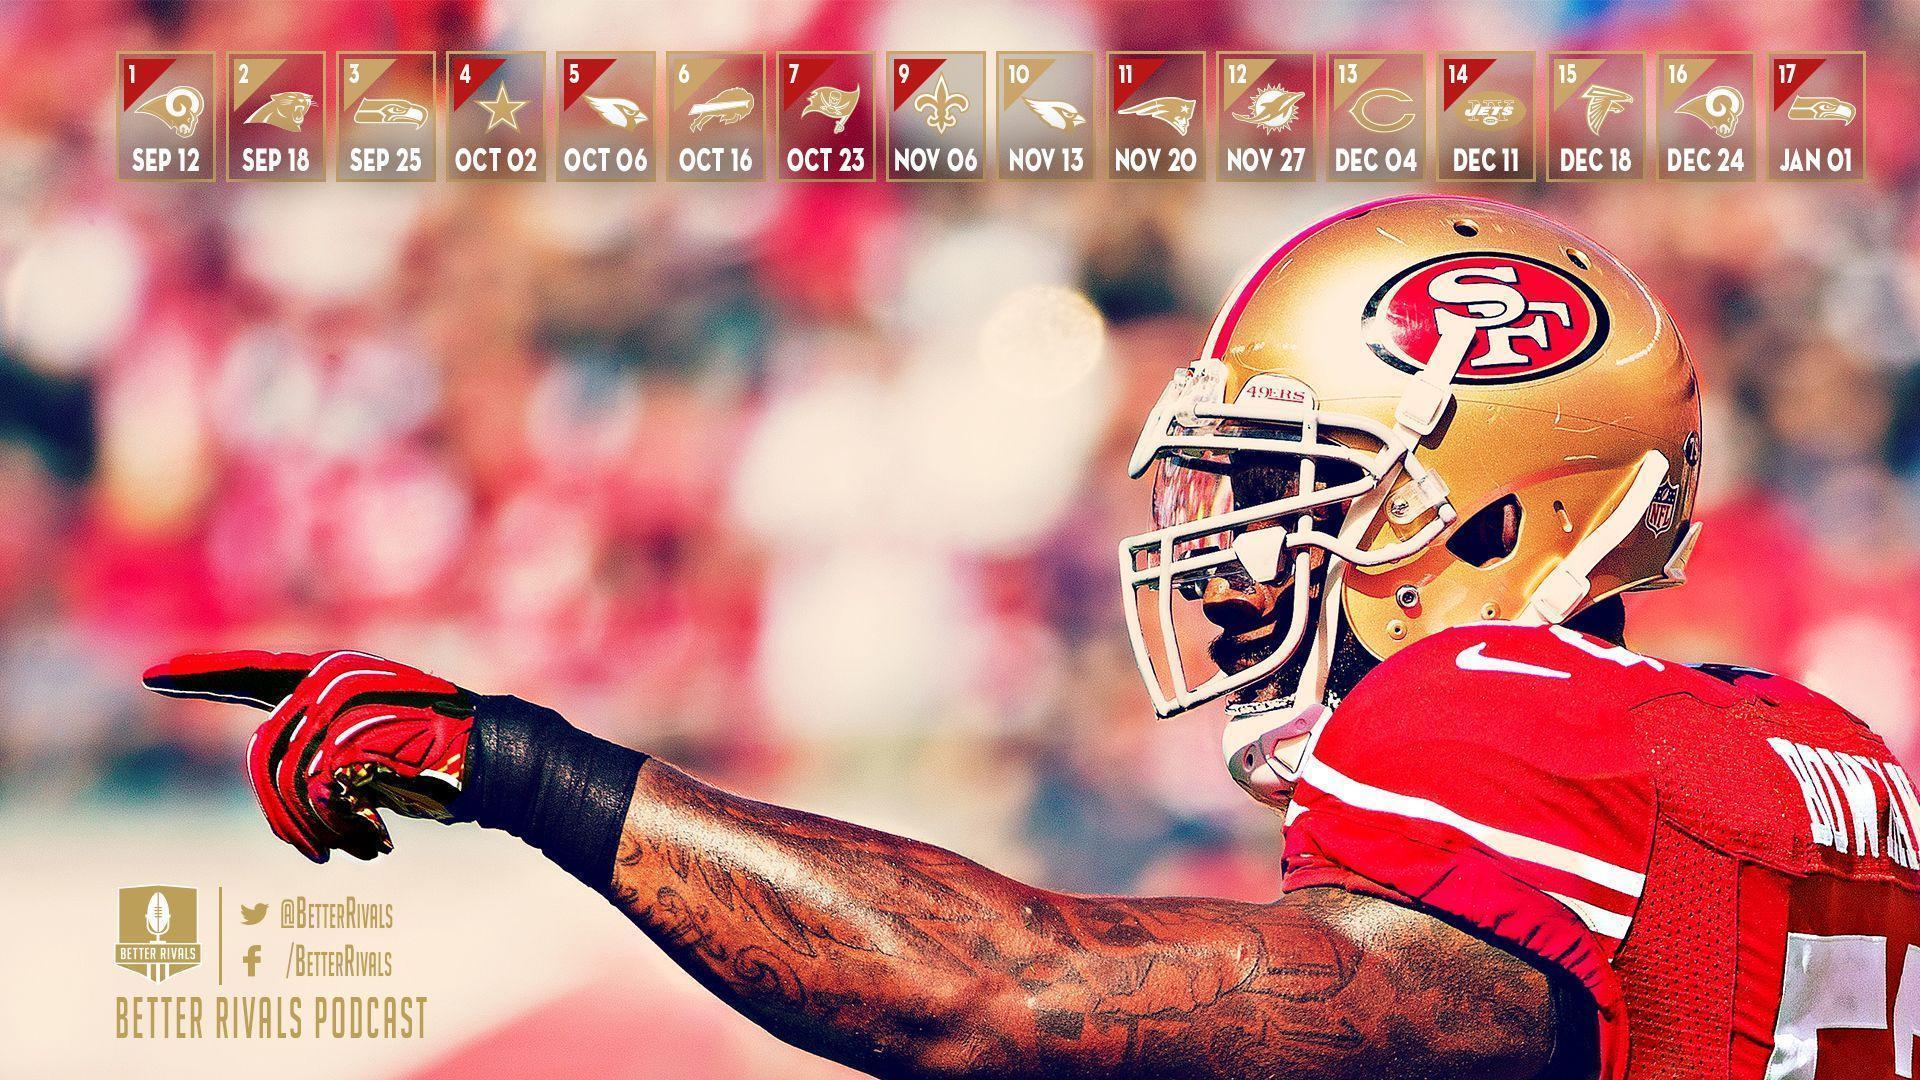 New 49ers Wallpaper for Desktop and Mobile